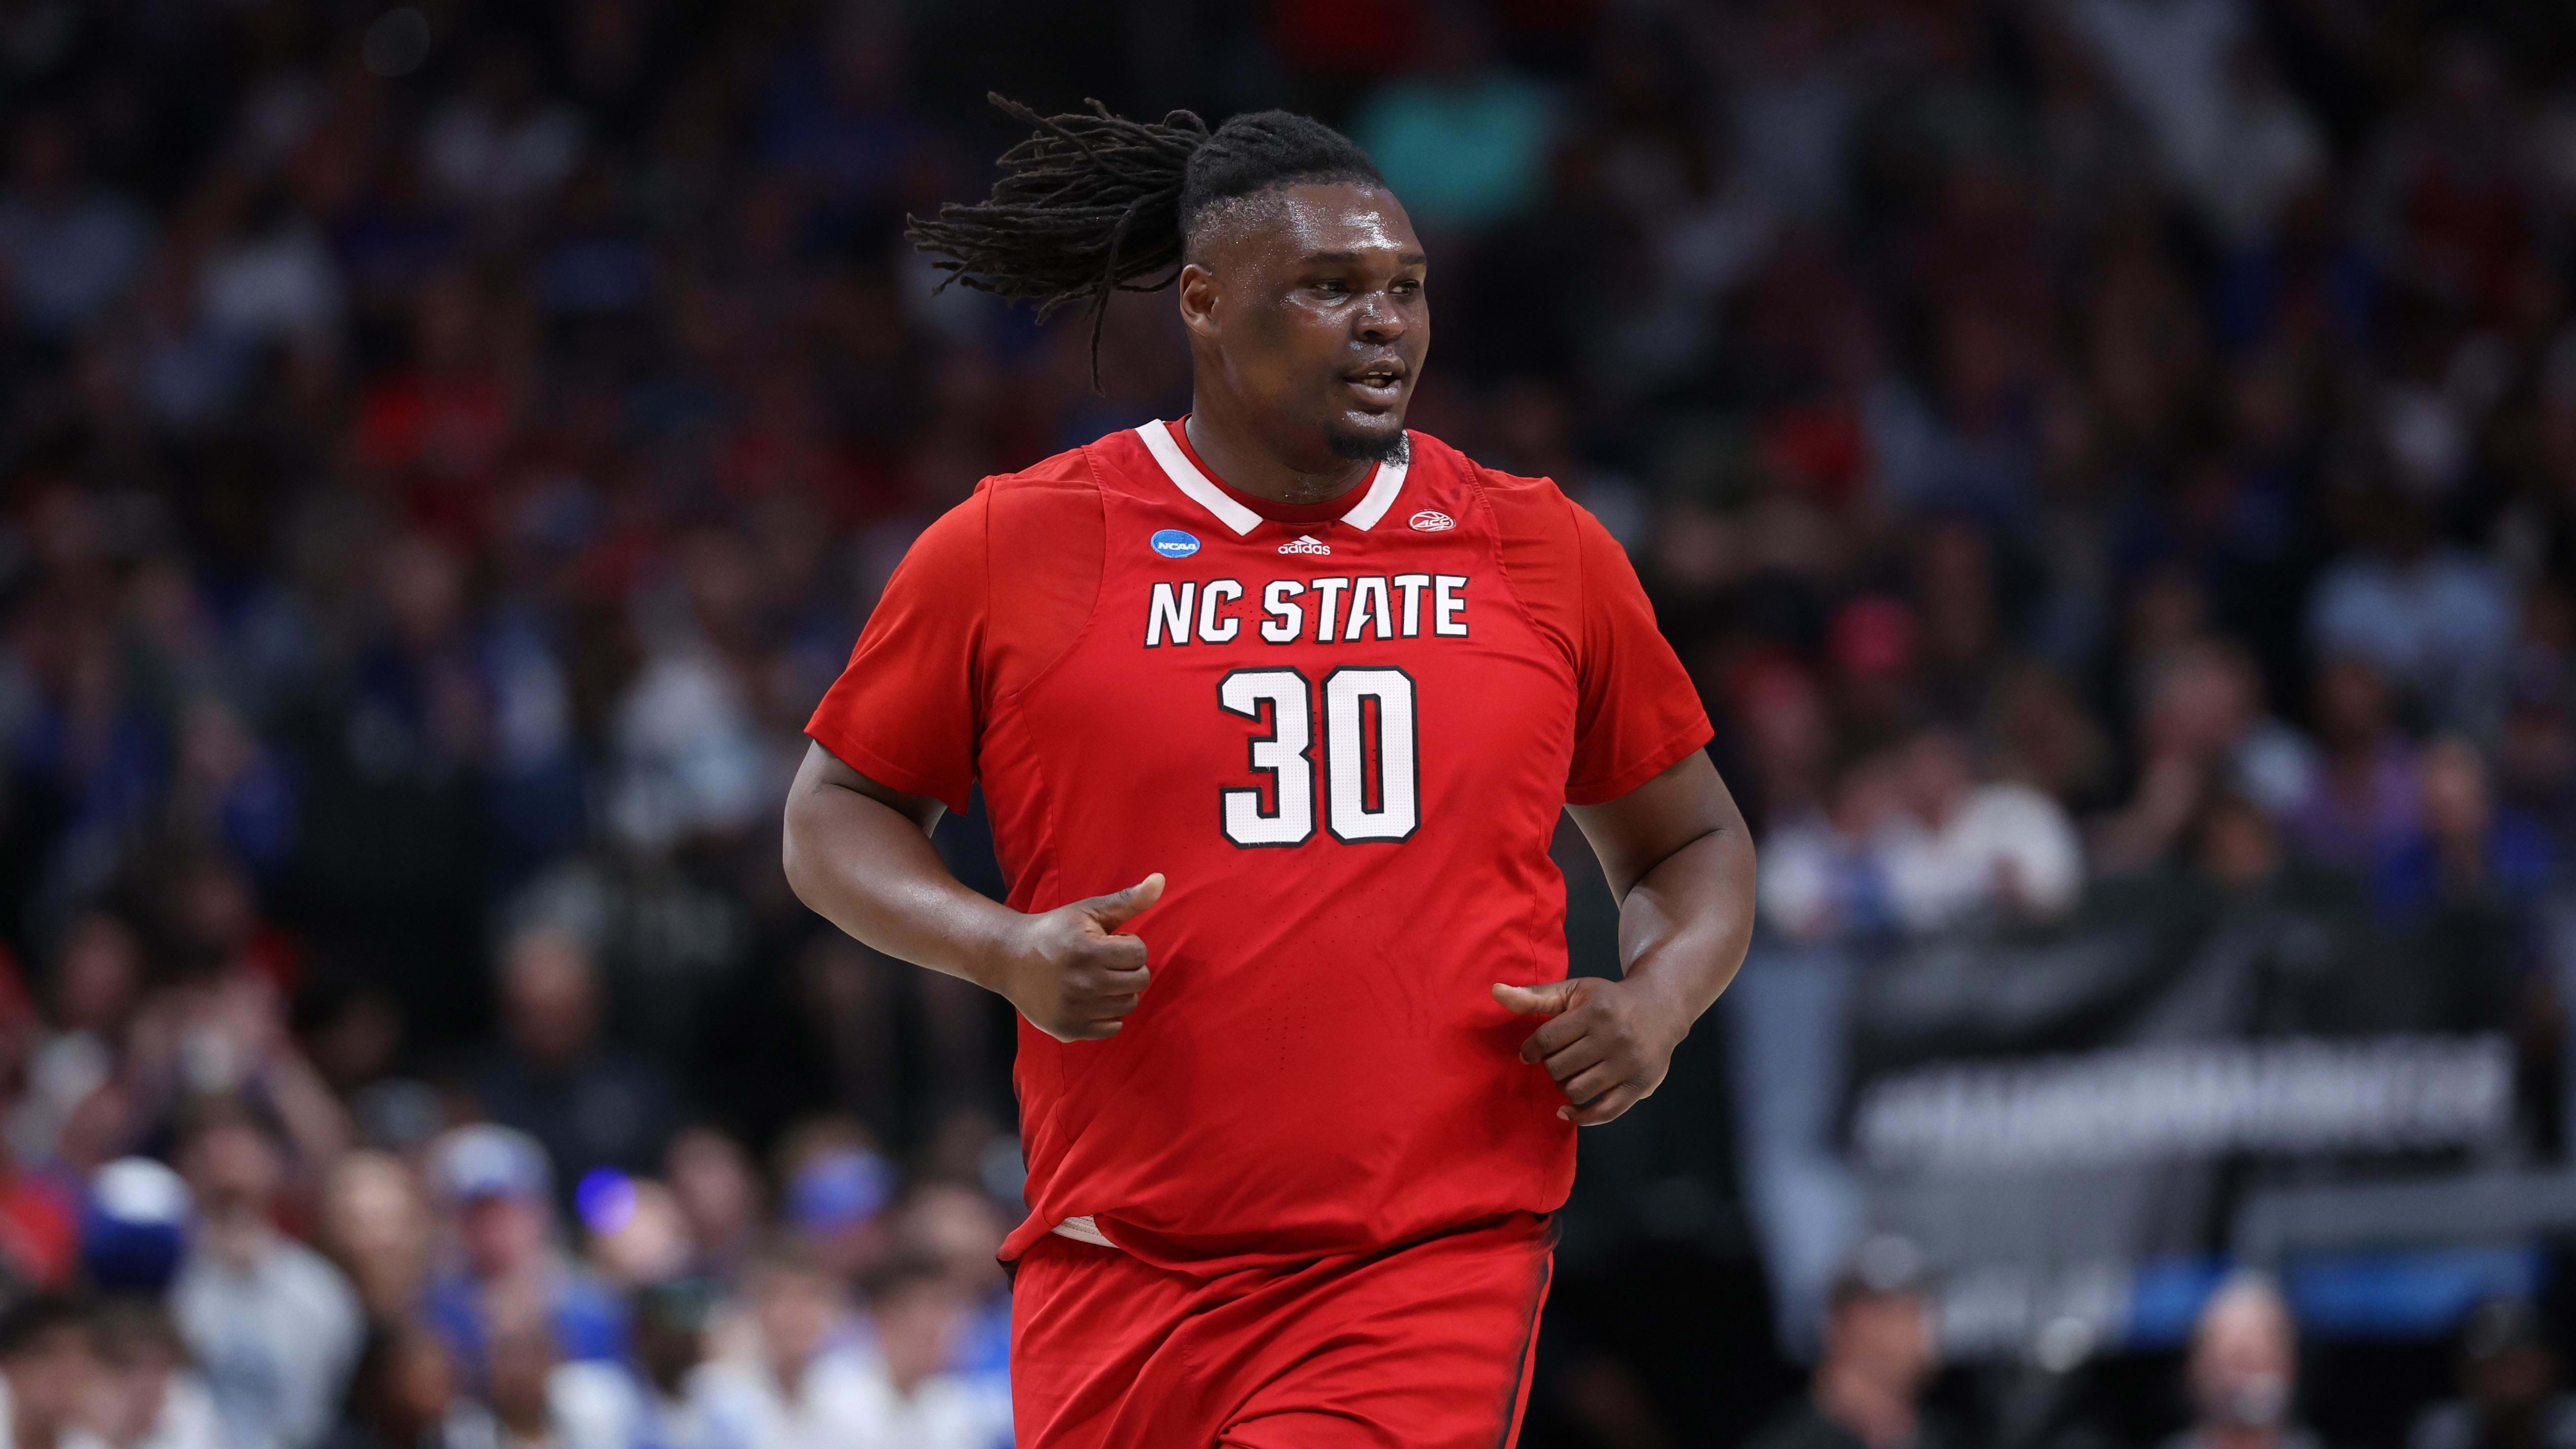 NC State forward DJ Burns will be key for the Wolfpack in the Final Four.